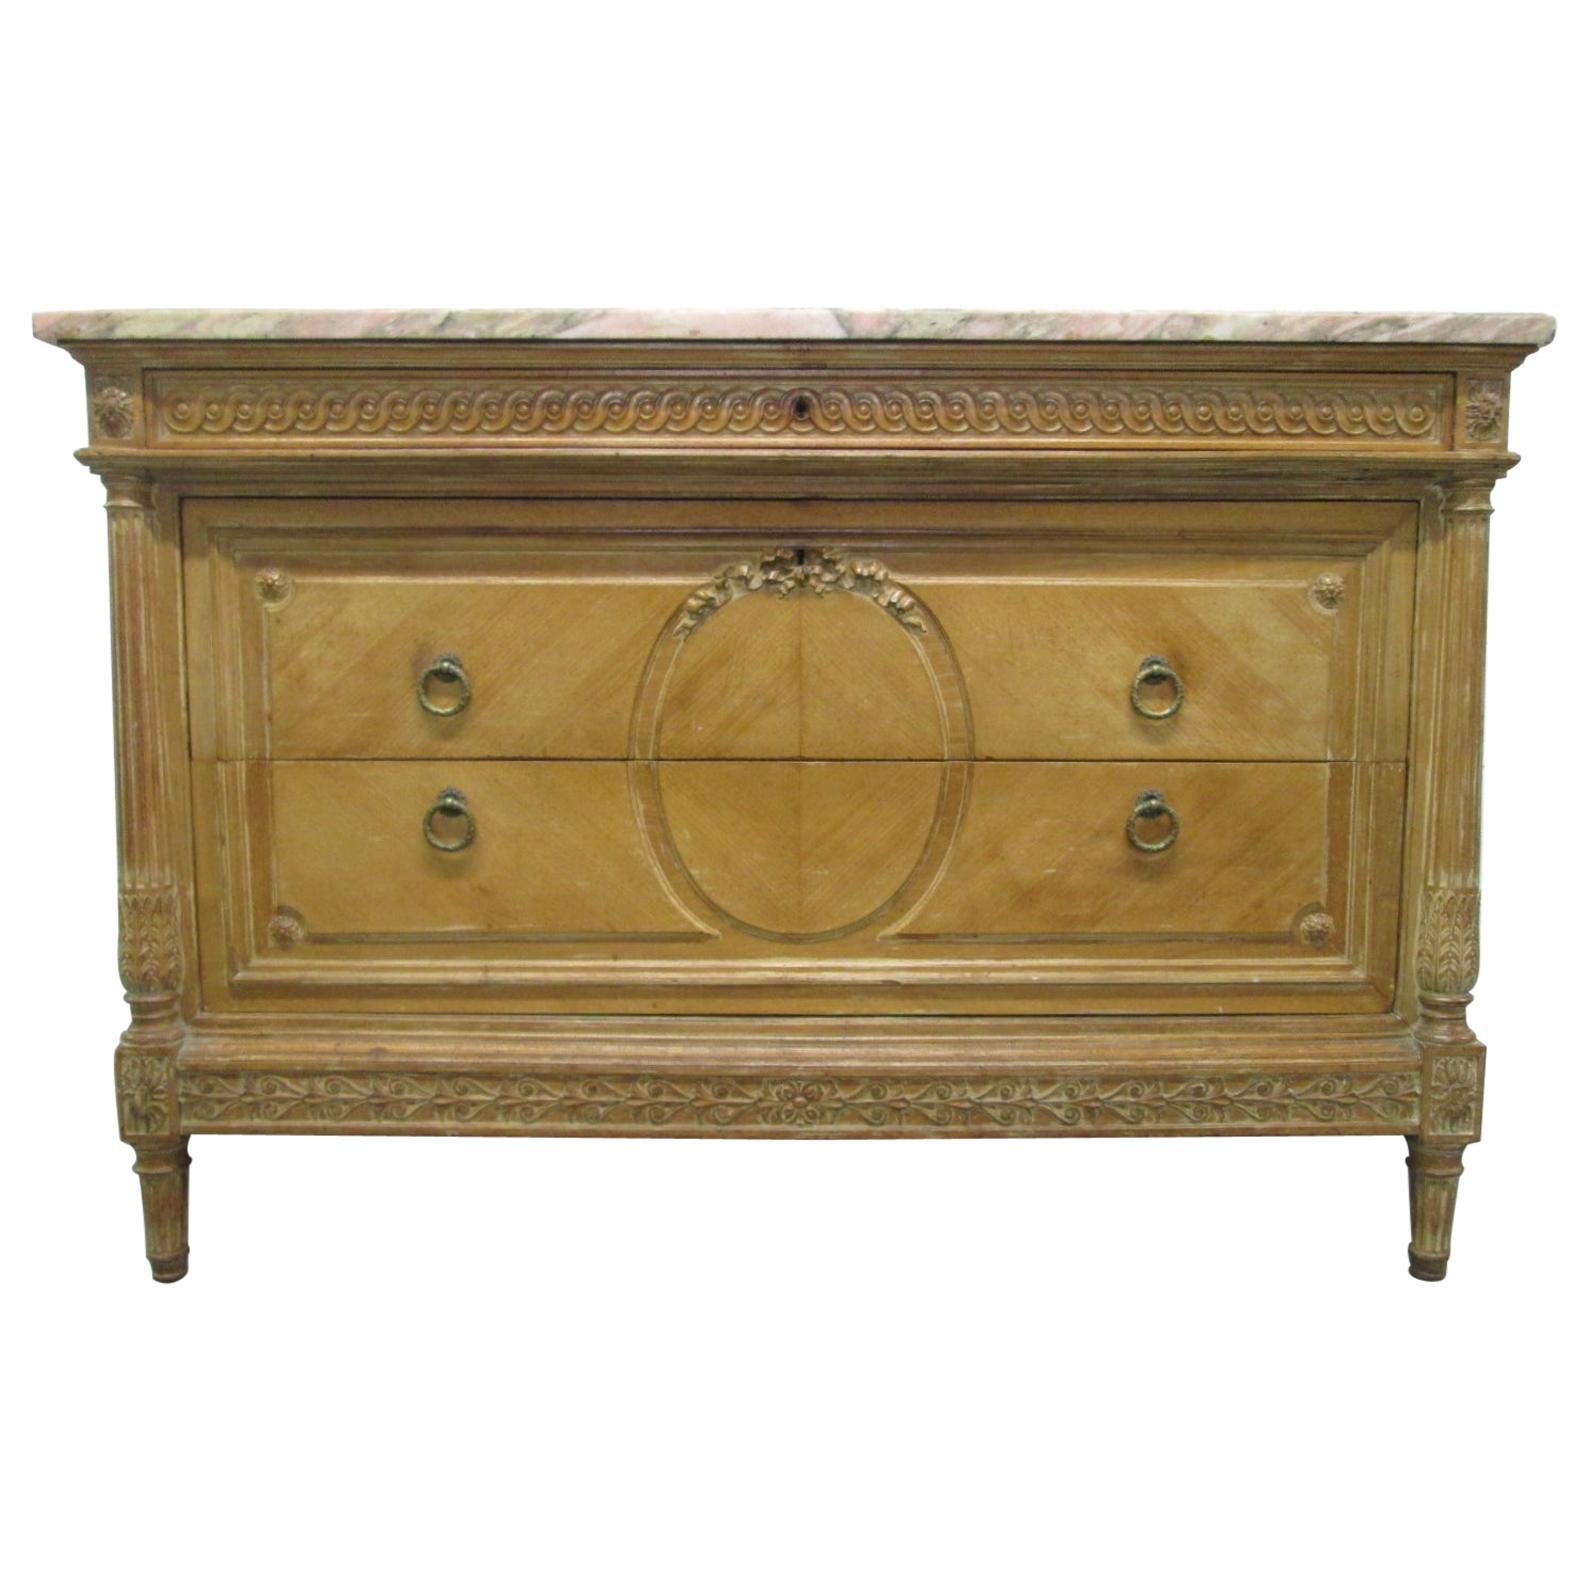 Antique French Marble-Top Dresser